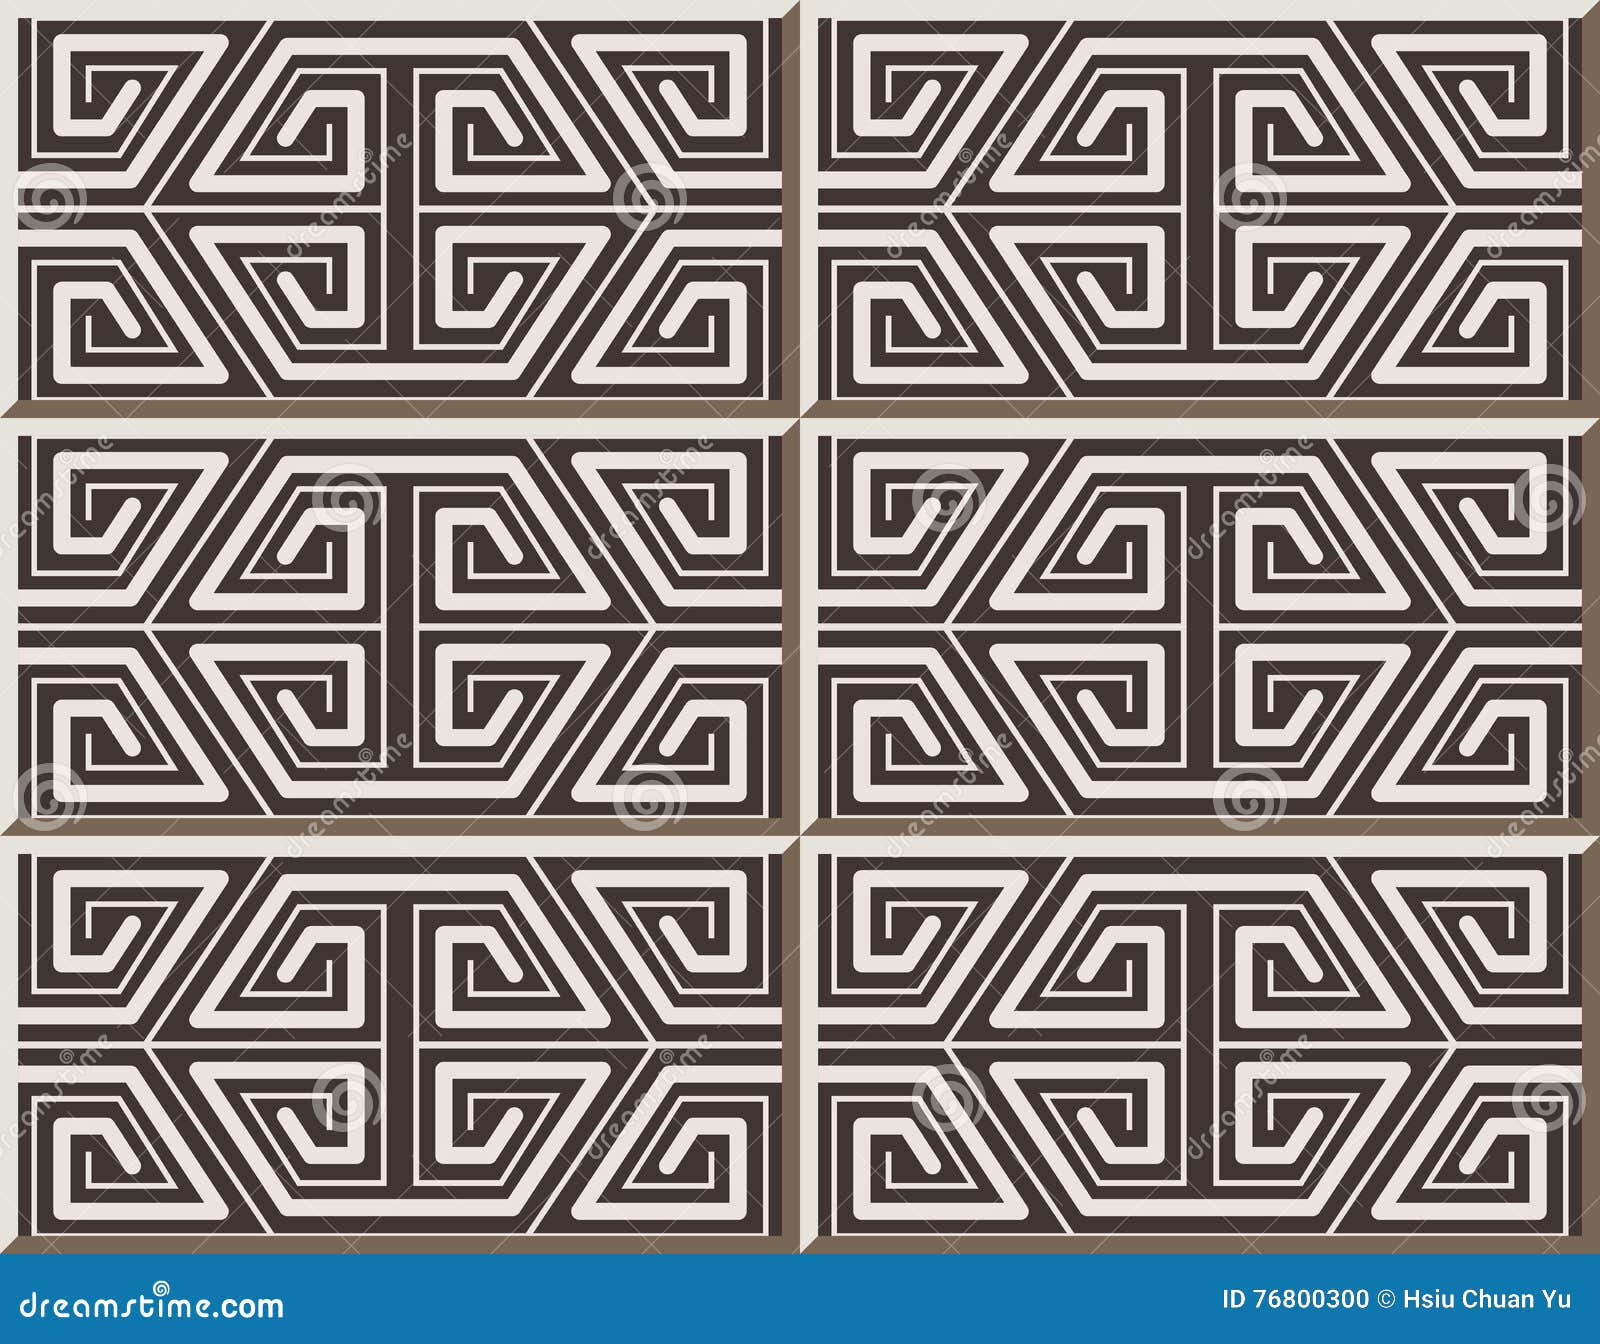 Ceramic tile pattern 426 polygon geometry cross line. Vintage tile patterns can be used for wallpaper, pattern fills, web page background, surface textures.